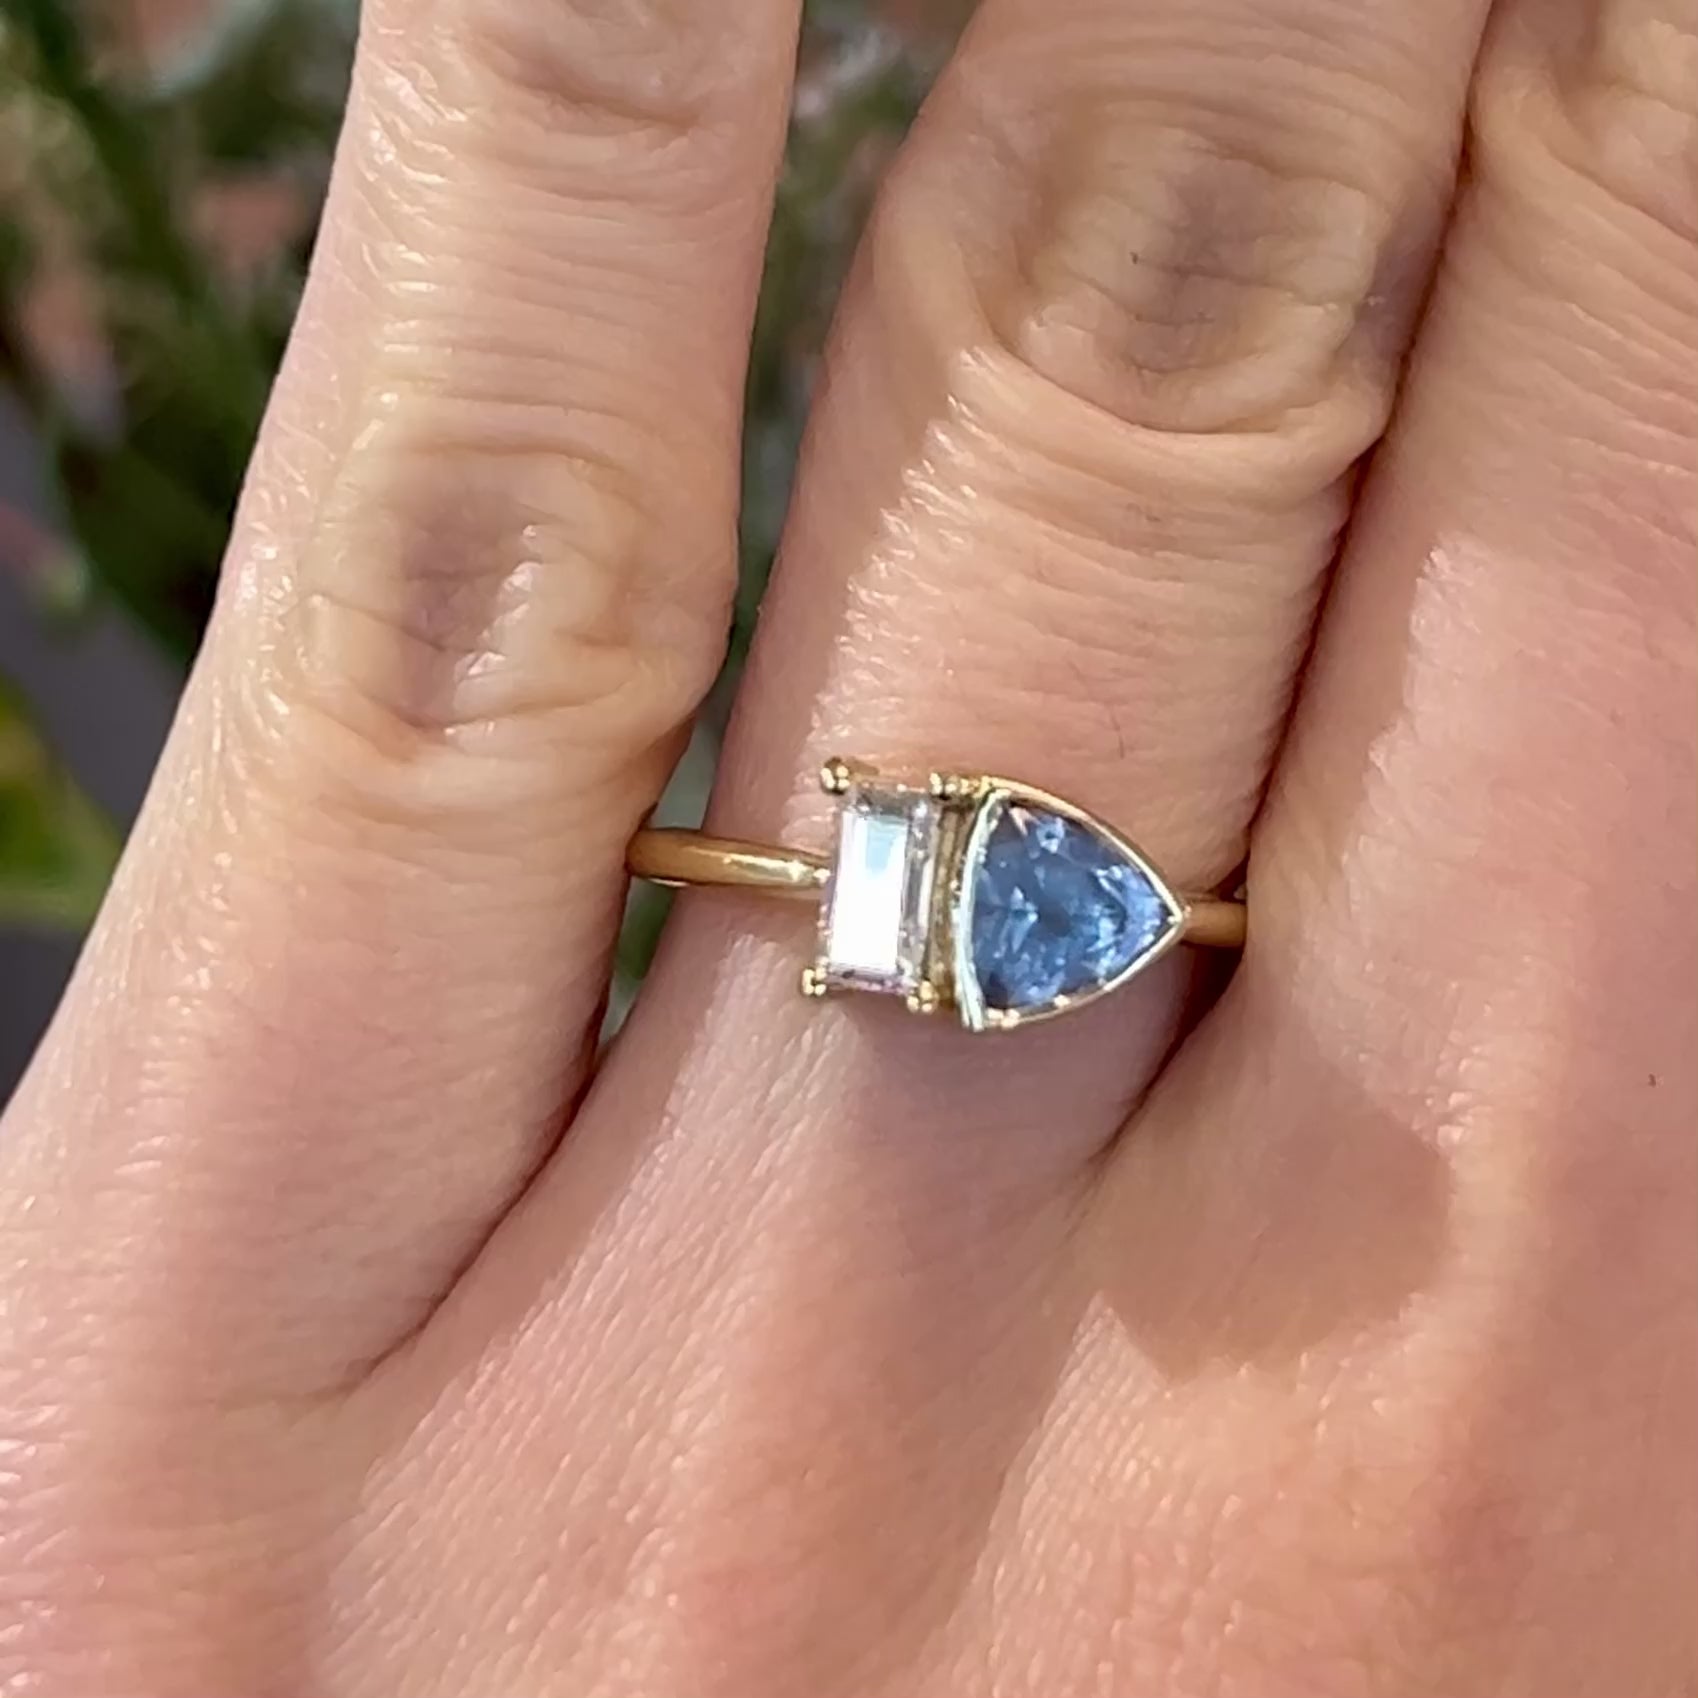 Video of Toi-et-moi baguette diamond and light blue Montana sapphire engagement ring set in 14k yellow gold on a hand